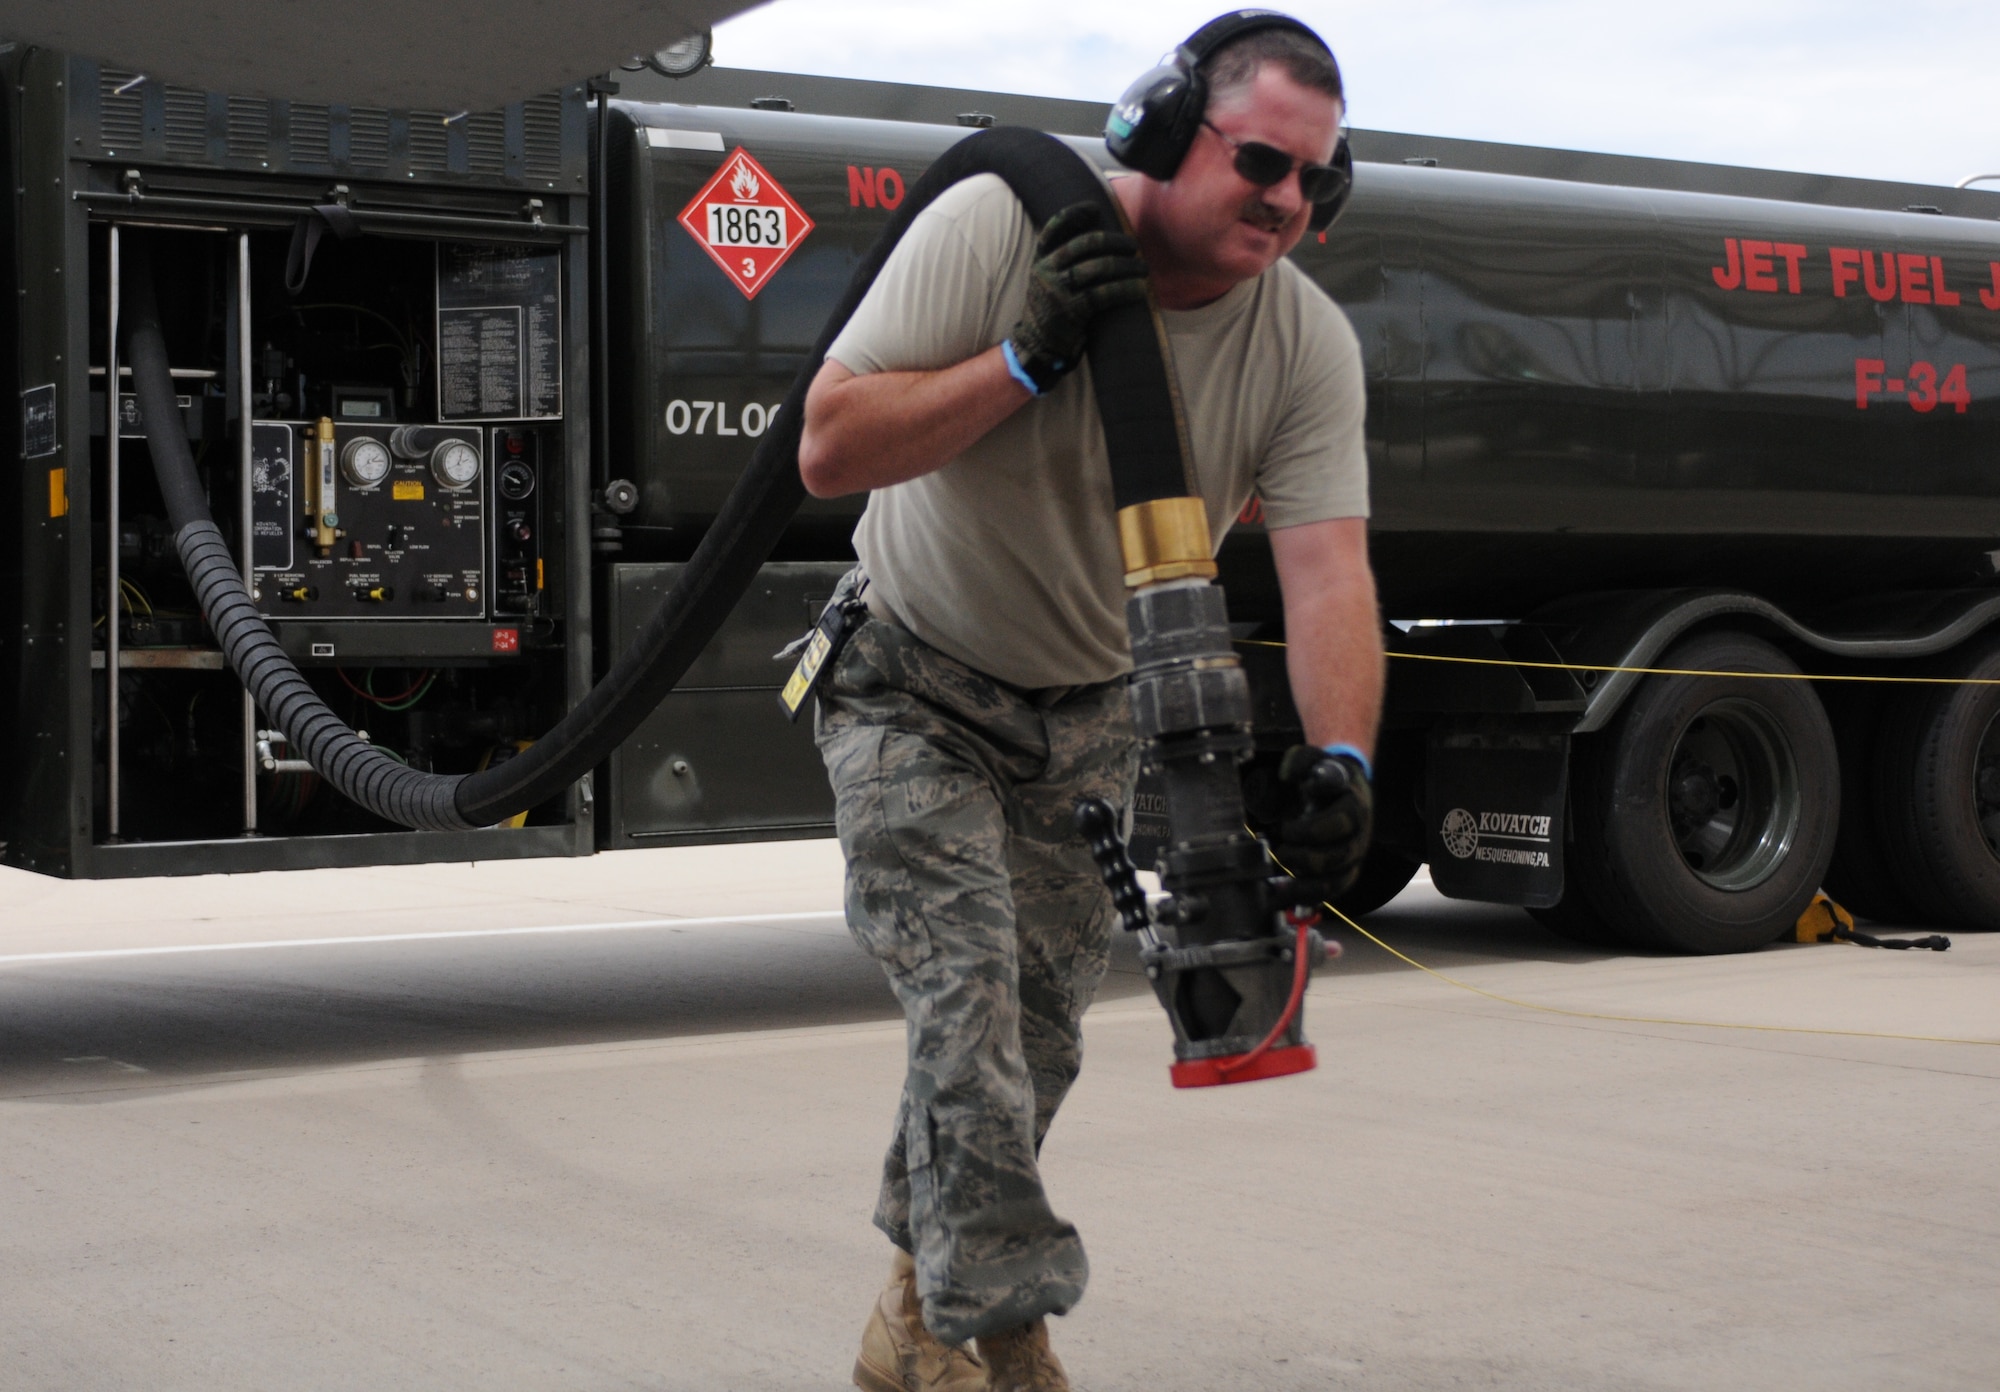 Staff Sgt. Buzz Decker drags a fuel hose from a 6,000-gallon tanker to an F-16 on the 162nd Fighter Wing flightline at Tucson International Airport; a process that is repeated nearly 1,200 times each month. (Air Force photo by Staff Sgt. Jordan Jones)